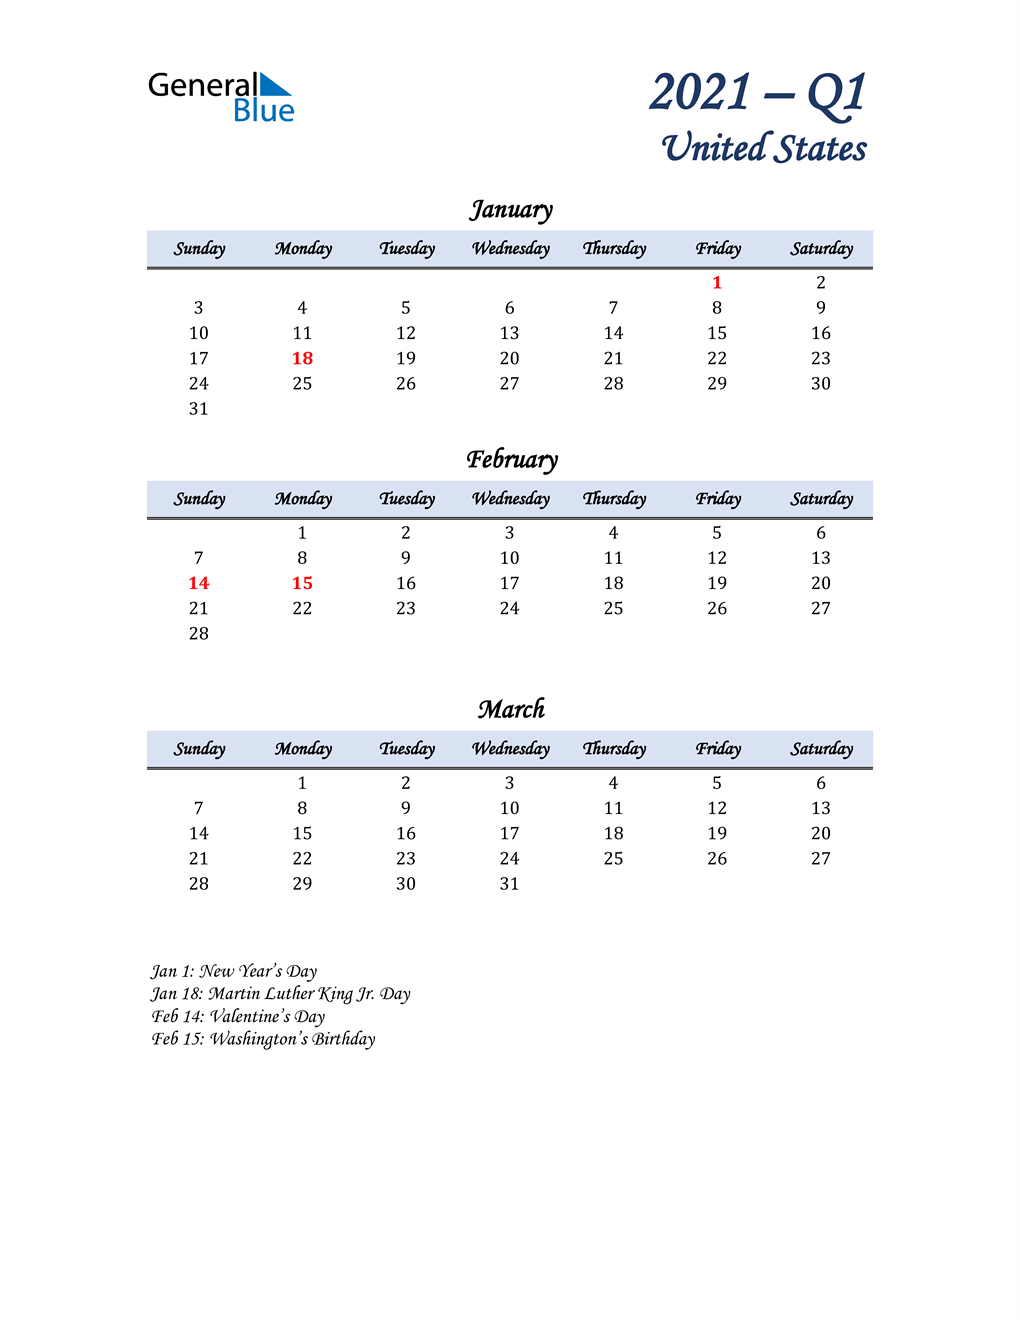  January, February, and March Calendar for United States